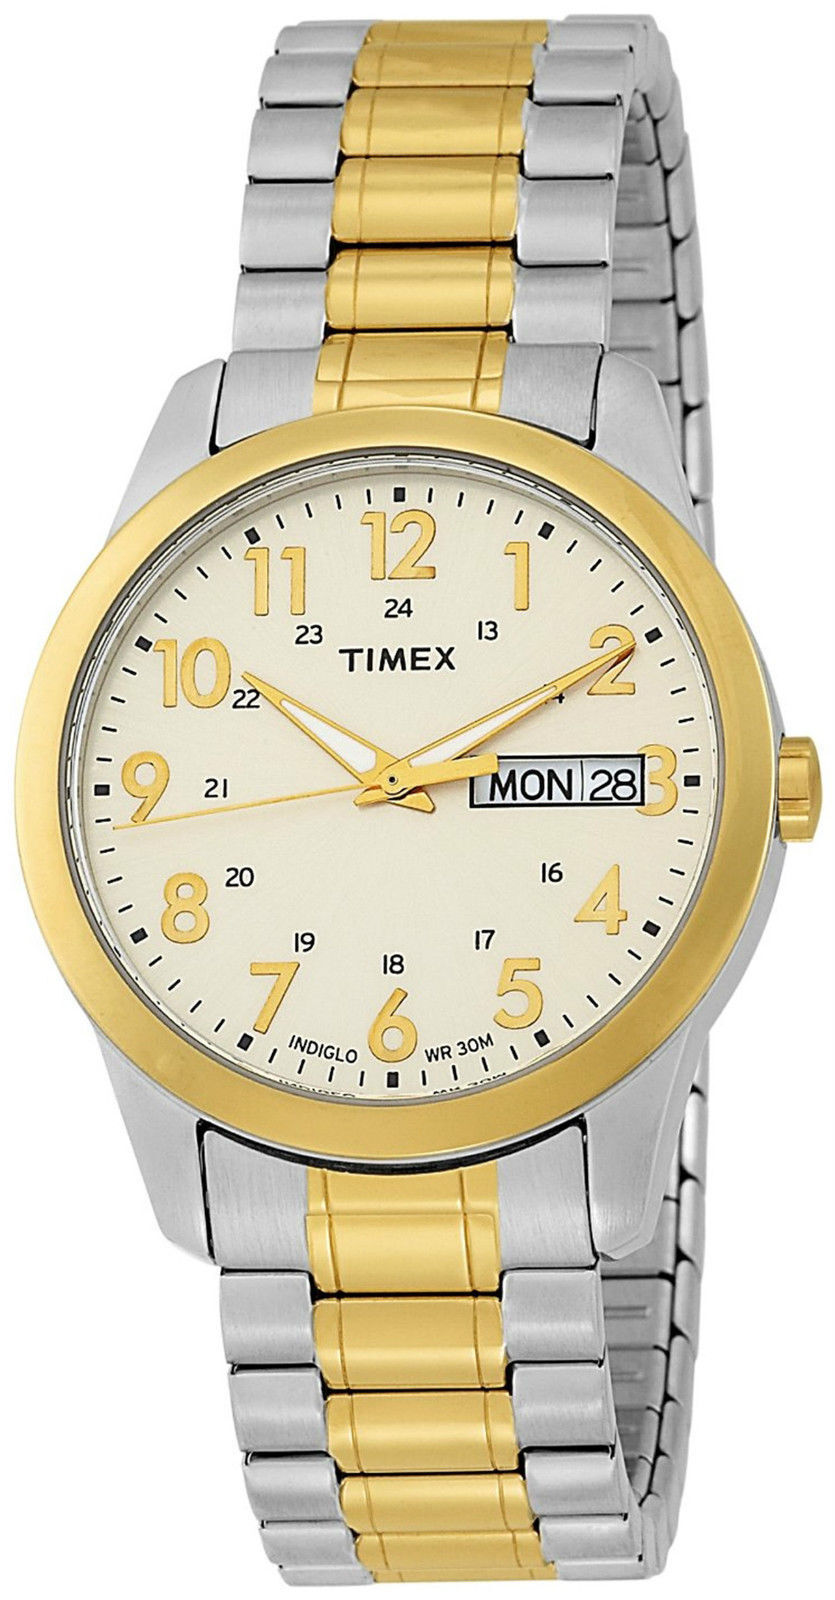 Timex T2M935, Men's Two-tone Expansion Band Watch, Indiglo, Day/Date